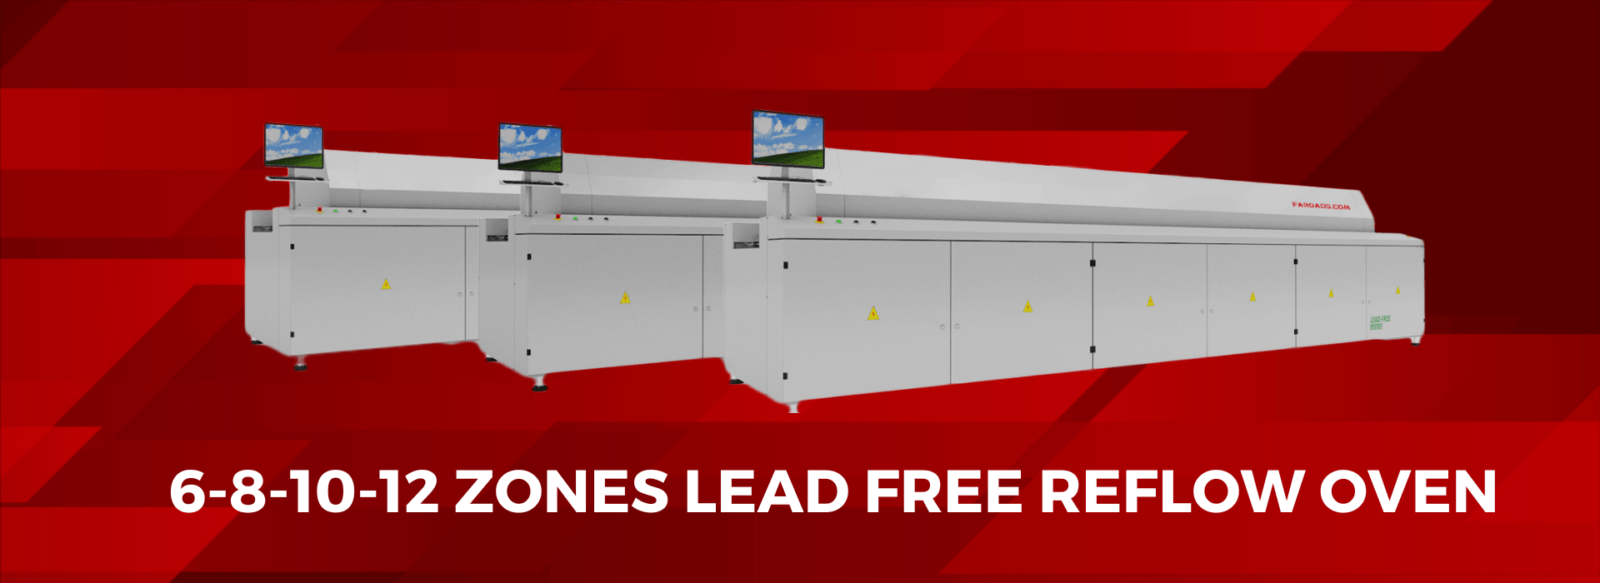 -lead-free-reflow-oven-series